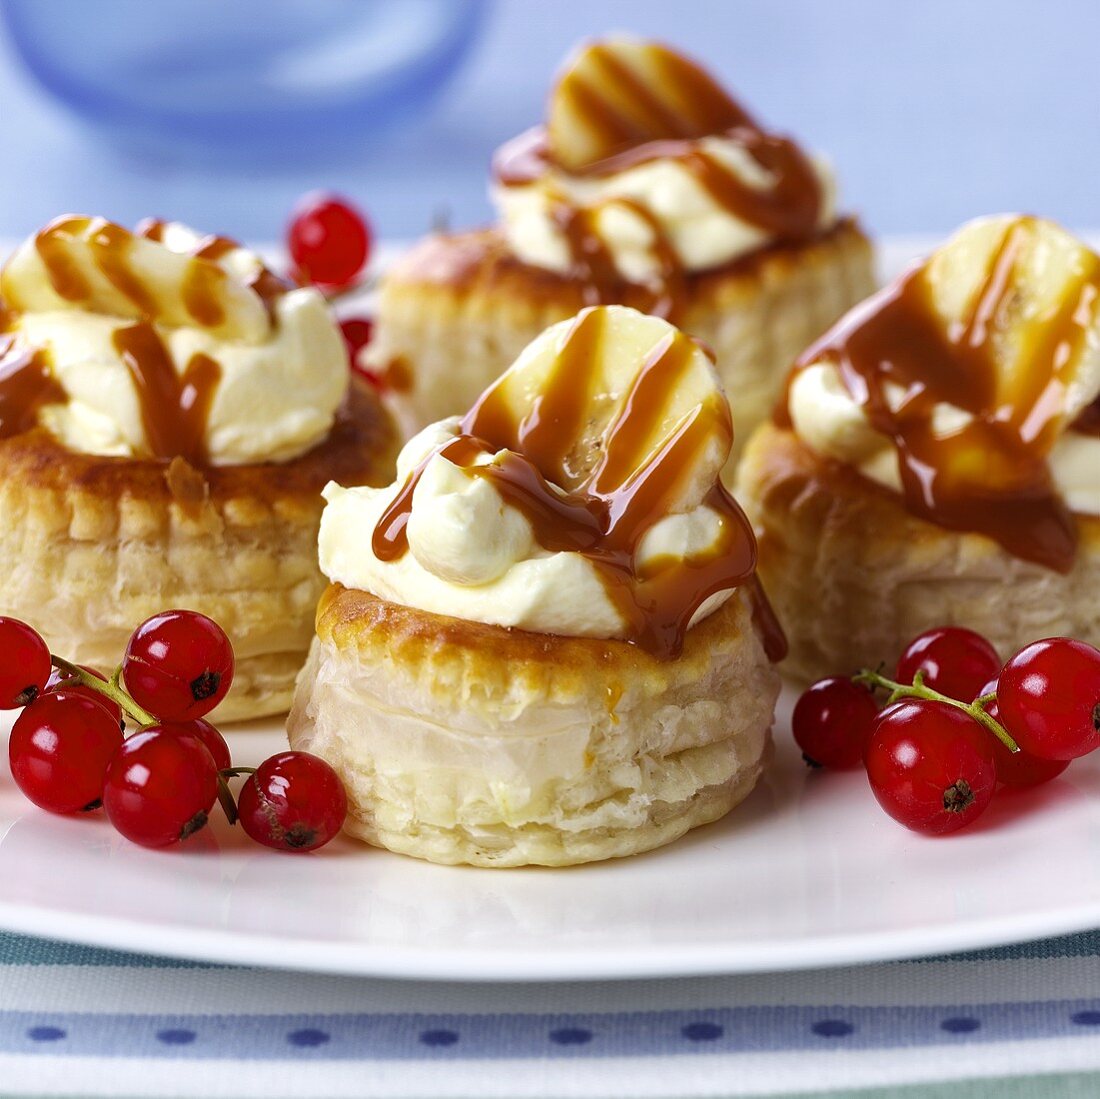 Sweet puff pastries with banana cream and caramel sauce